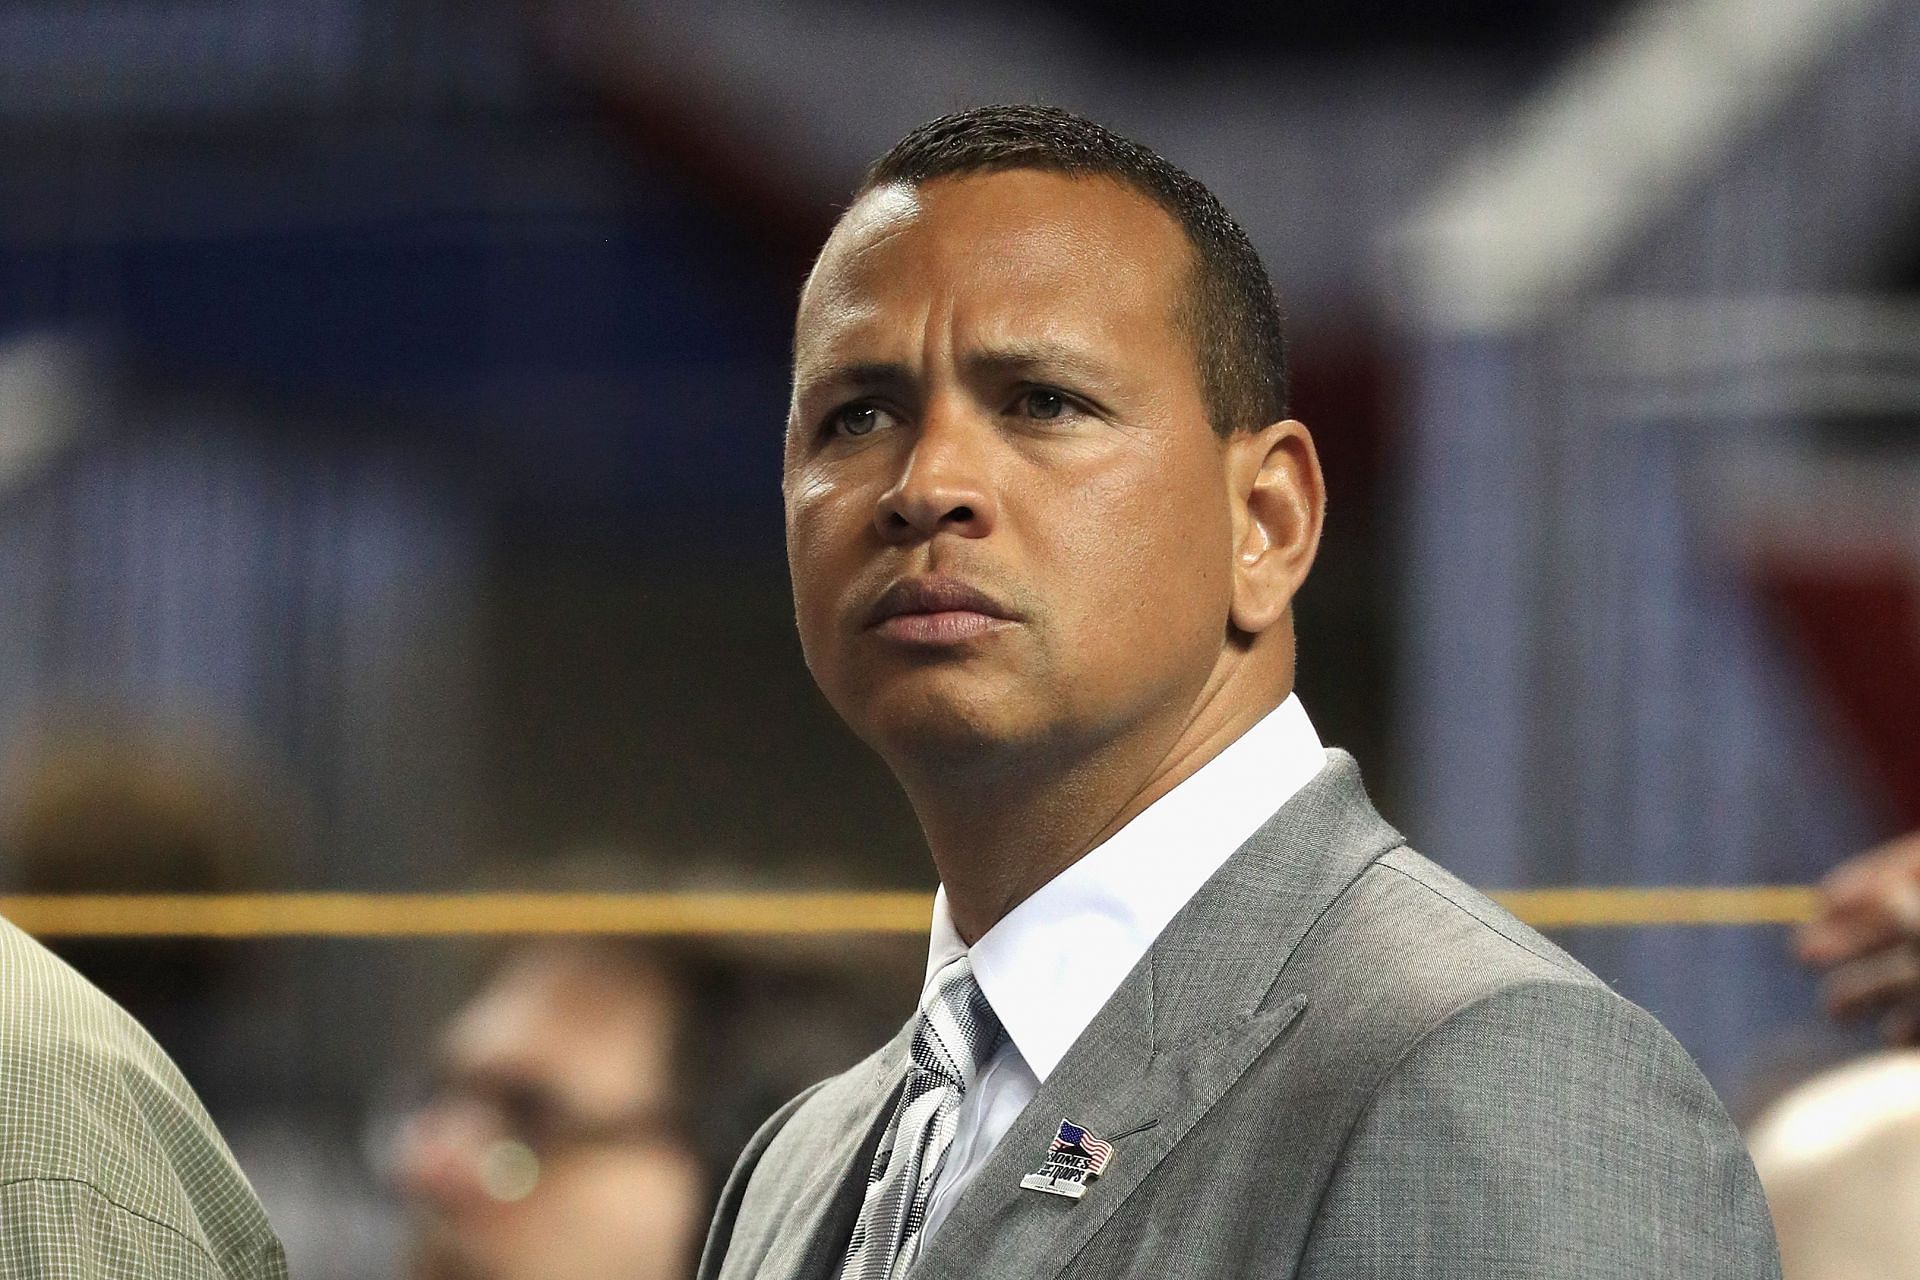 The Texas Rangers weren't wrong about Alex Rodriguez - POLITICO